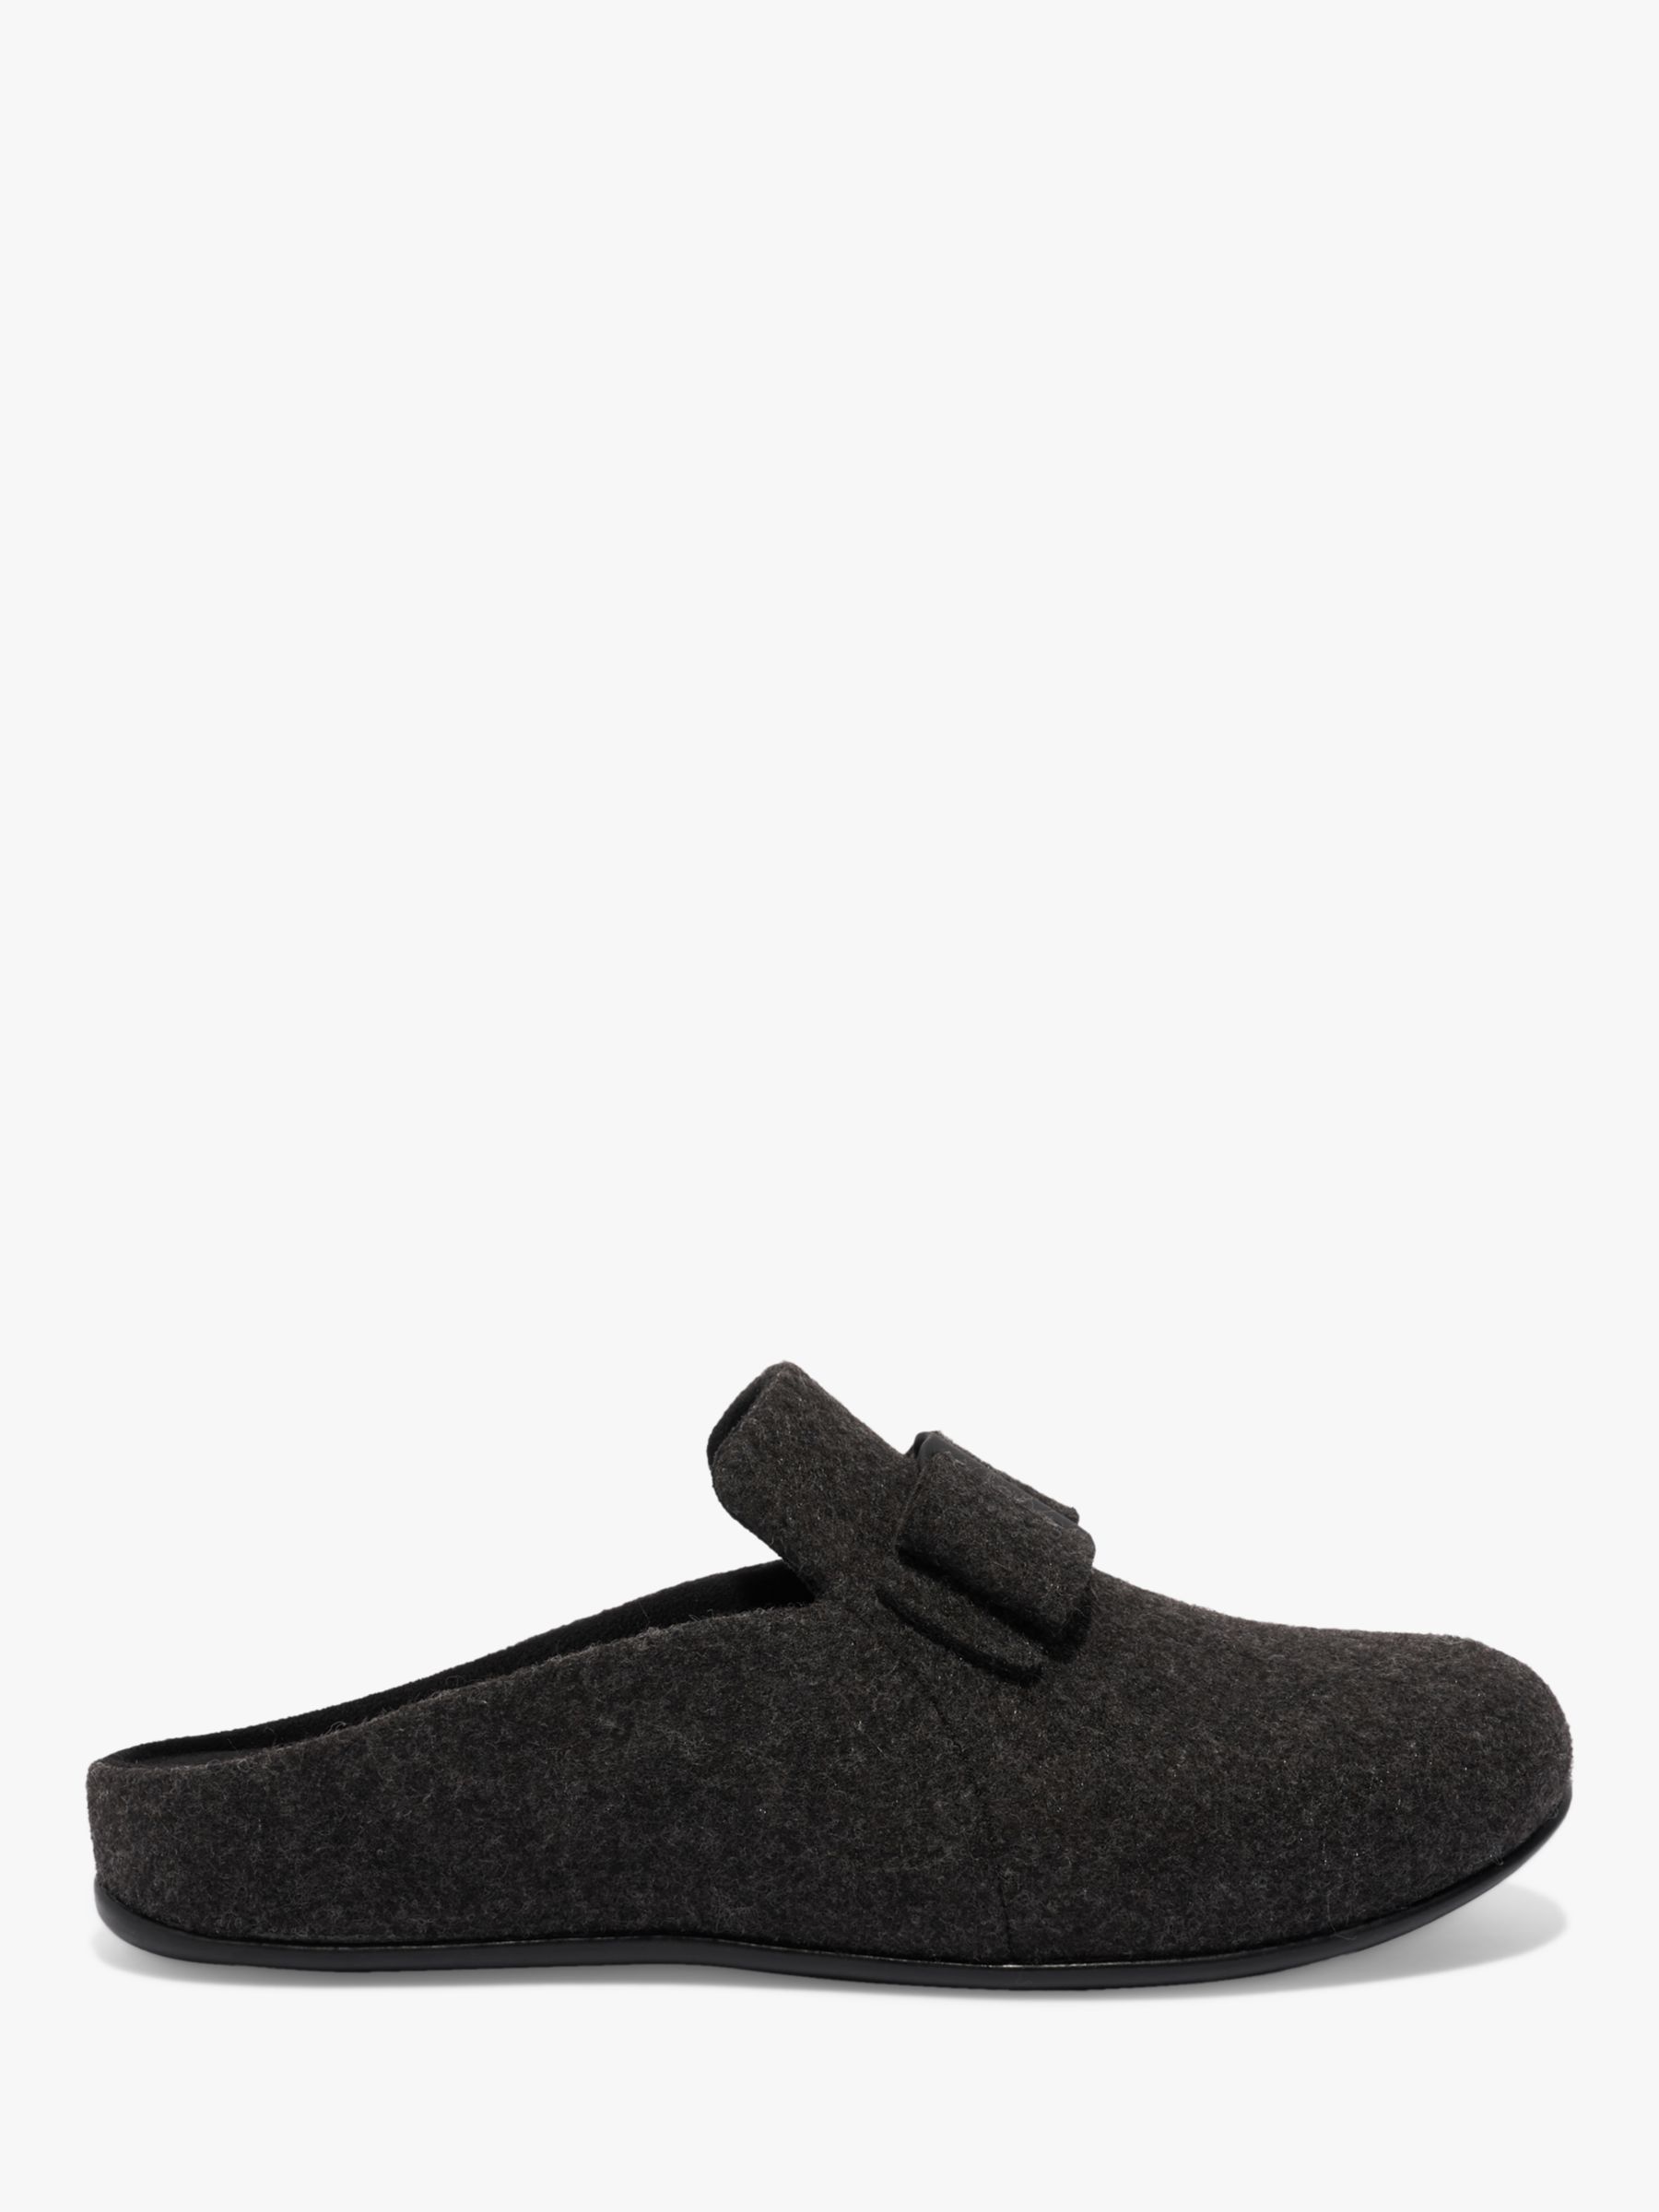 FitFlop Bow Mule Slippers, All Black, 3